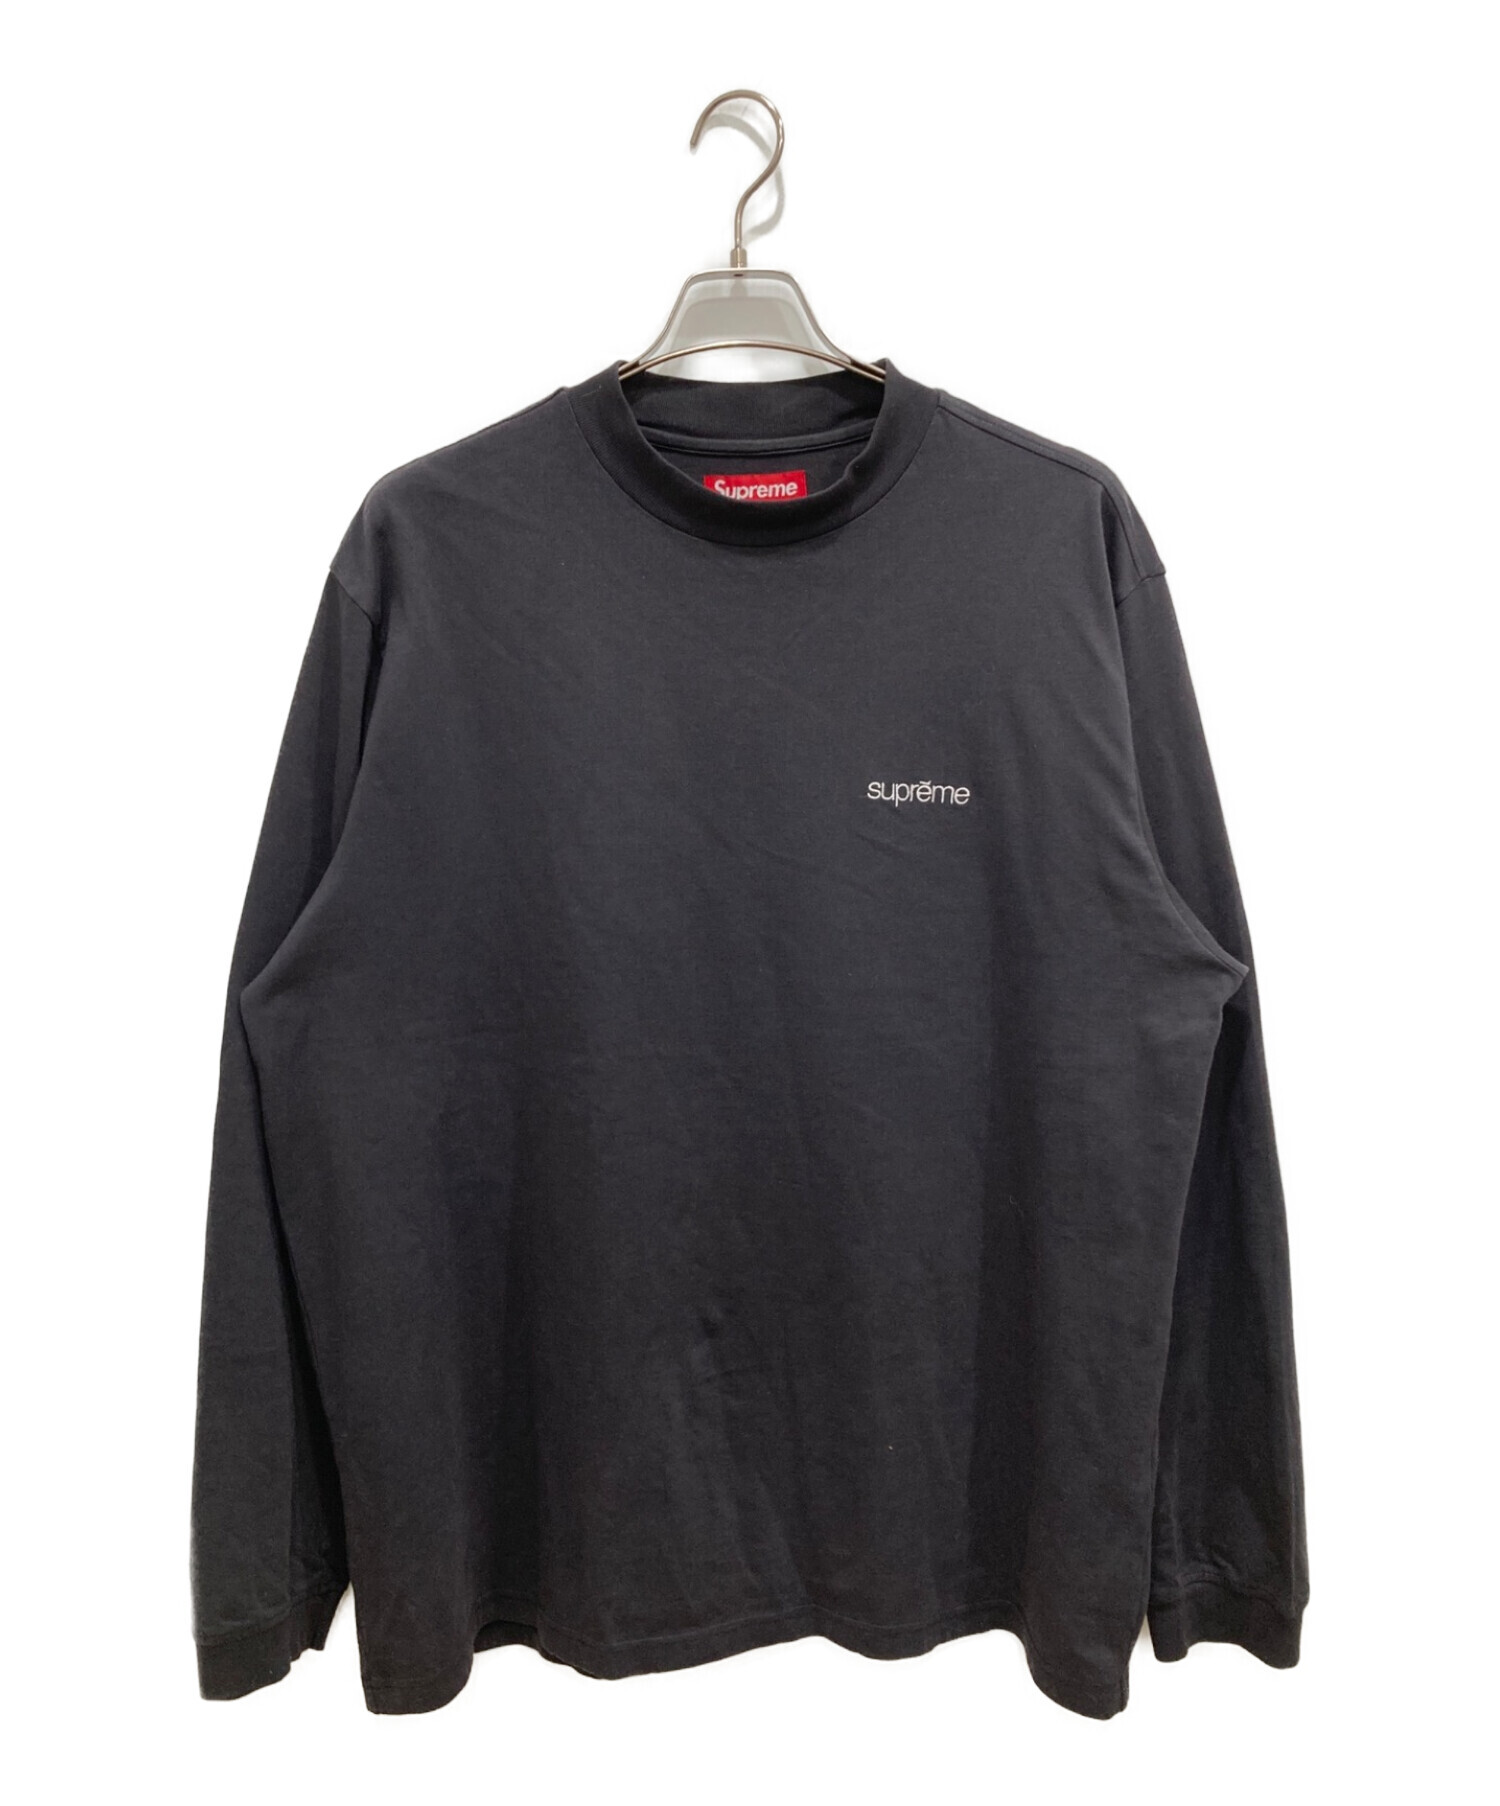 Supreme Mock Neck L/S Top Long Sleeve Tee T-Shirt Jersey FW22 Black Size M  NWT